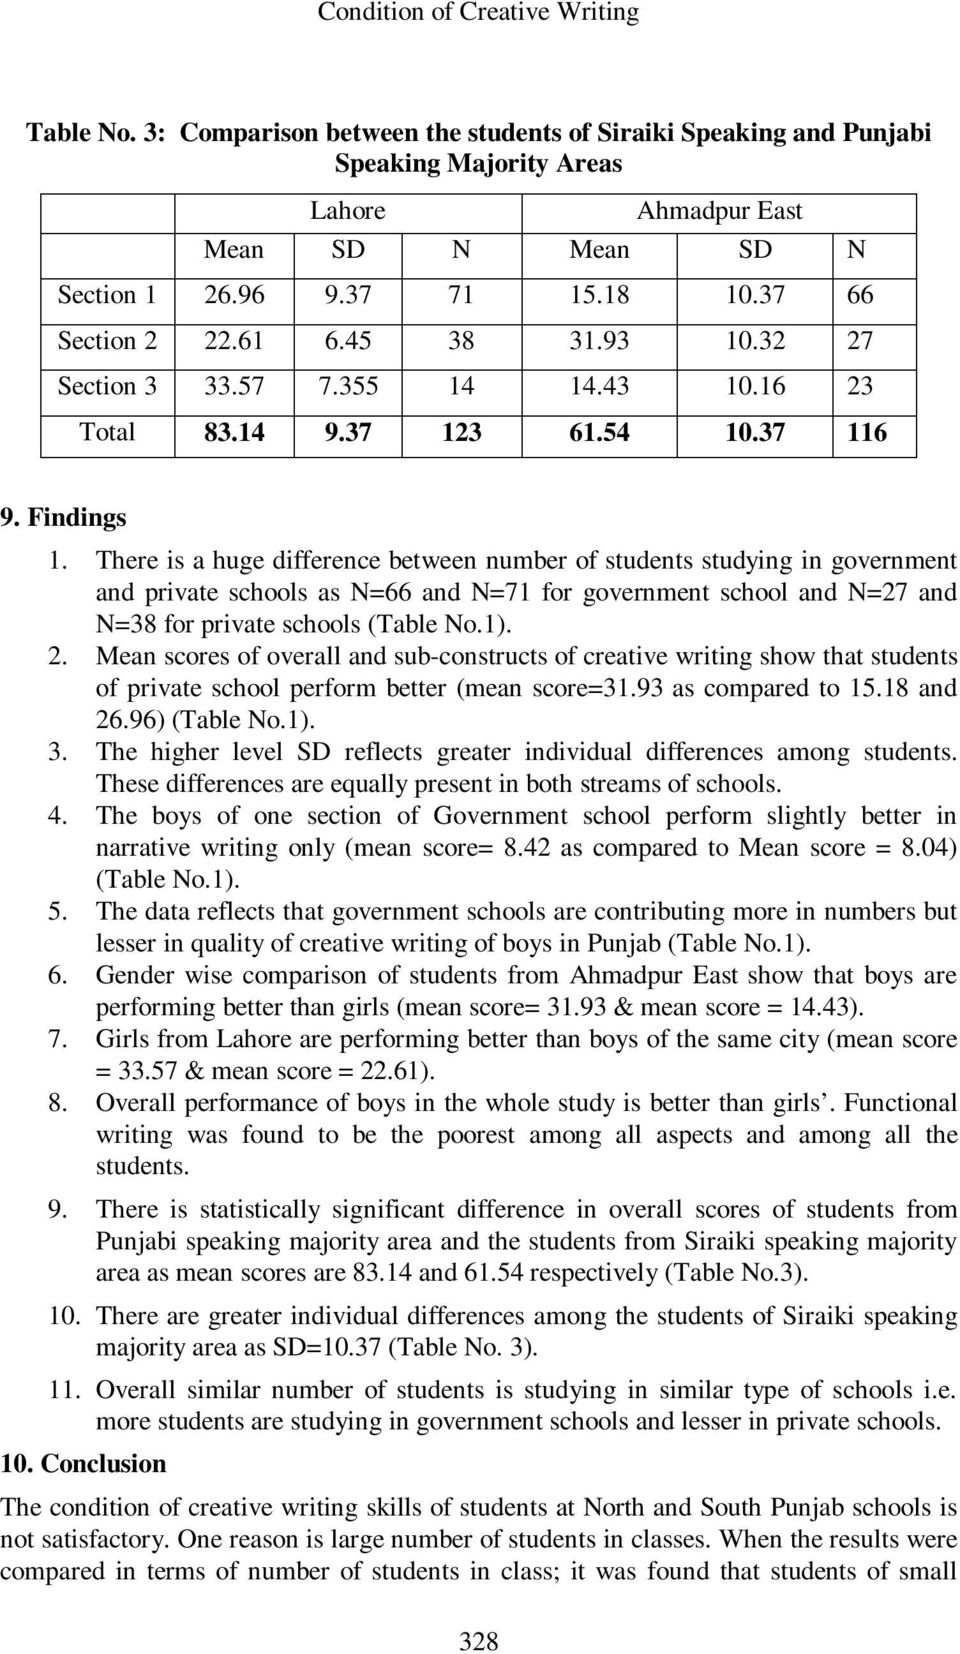 There is a huge difference between number of students studying in government and private schools as N=66 and N=71 for government school and N=27 and N=38 for private schools (Table No.1). 2.